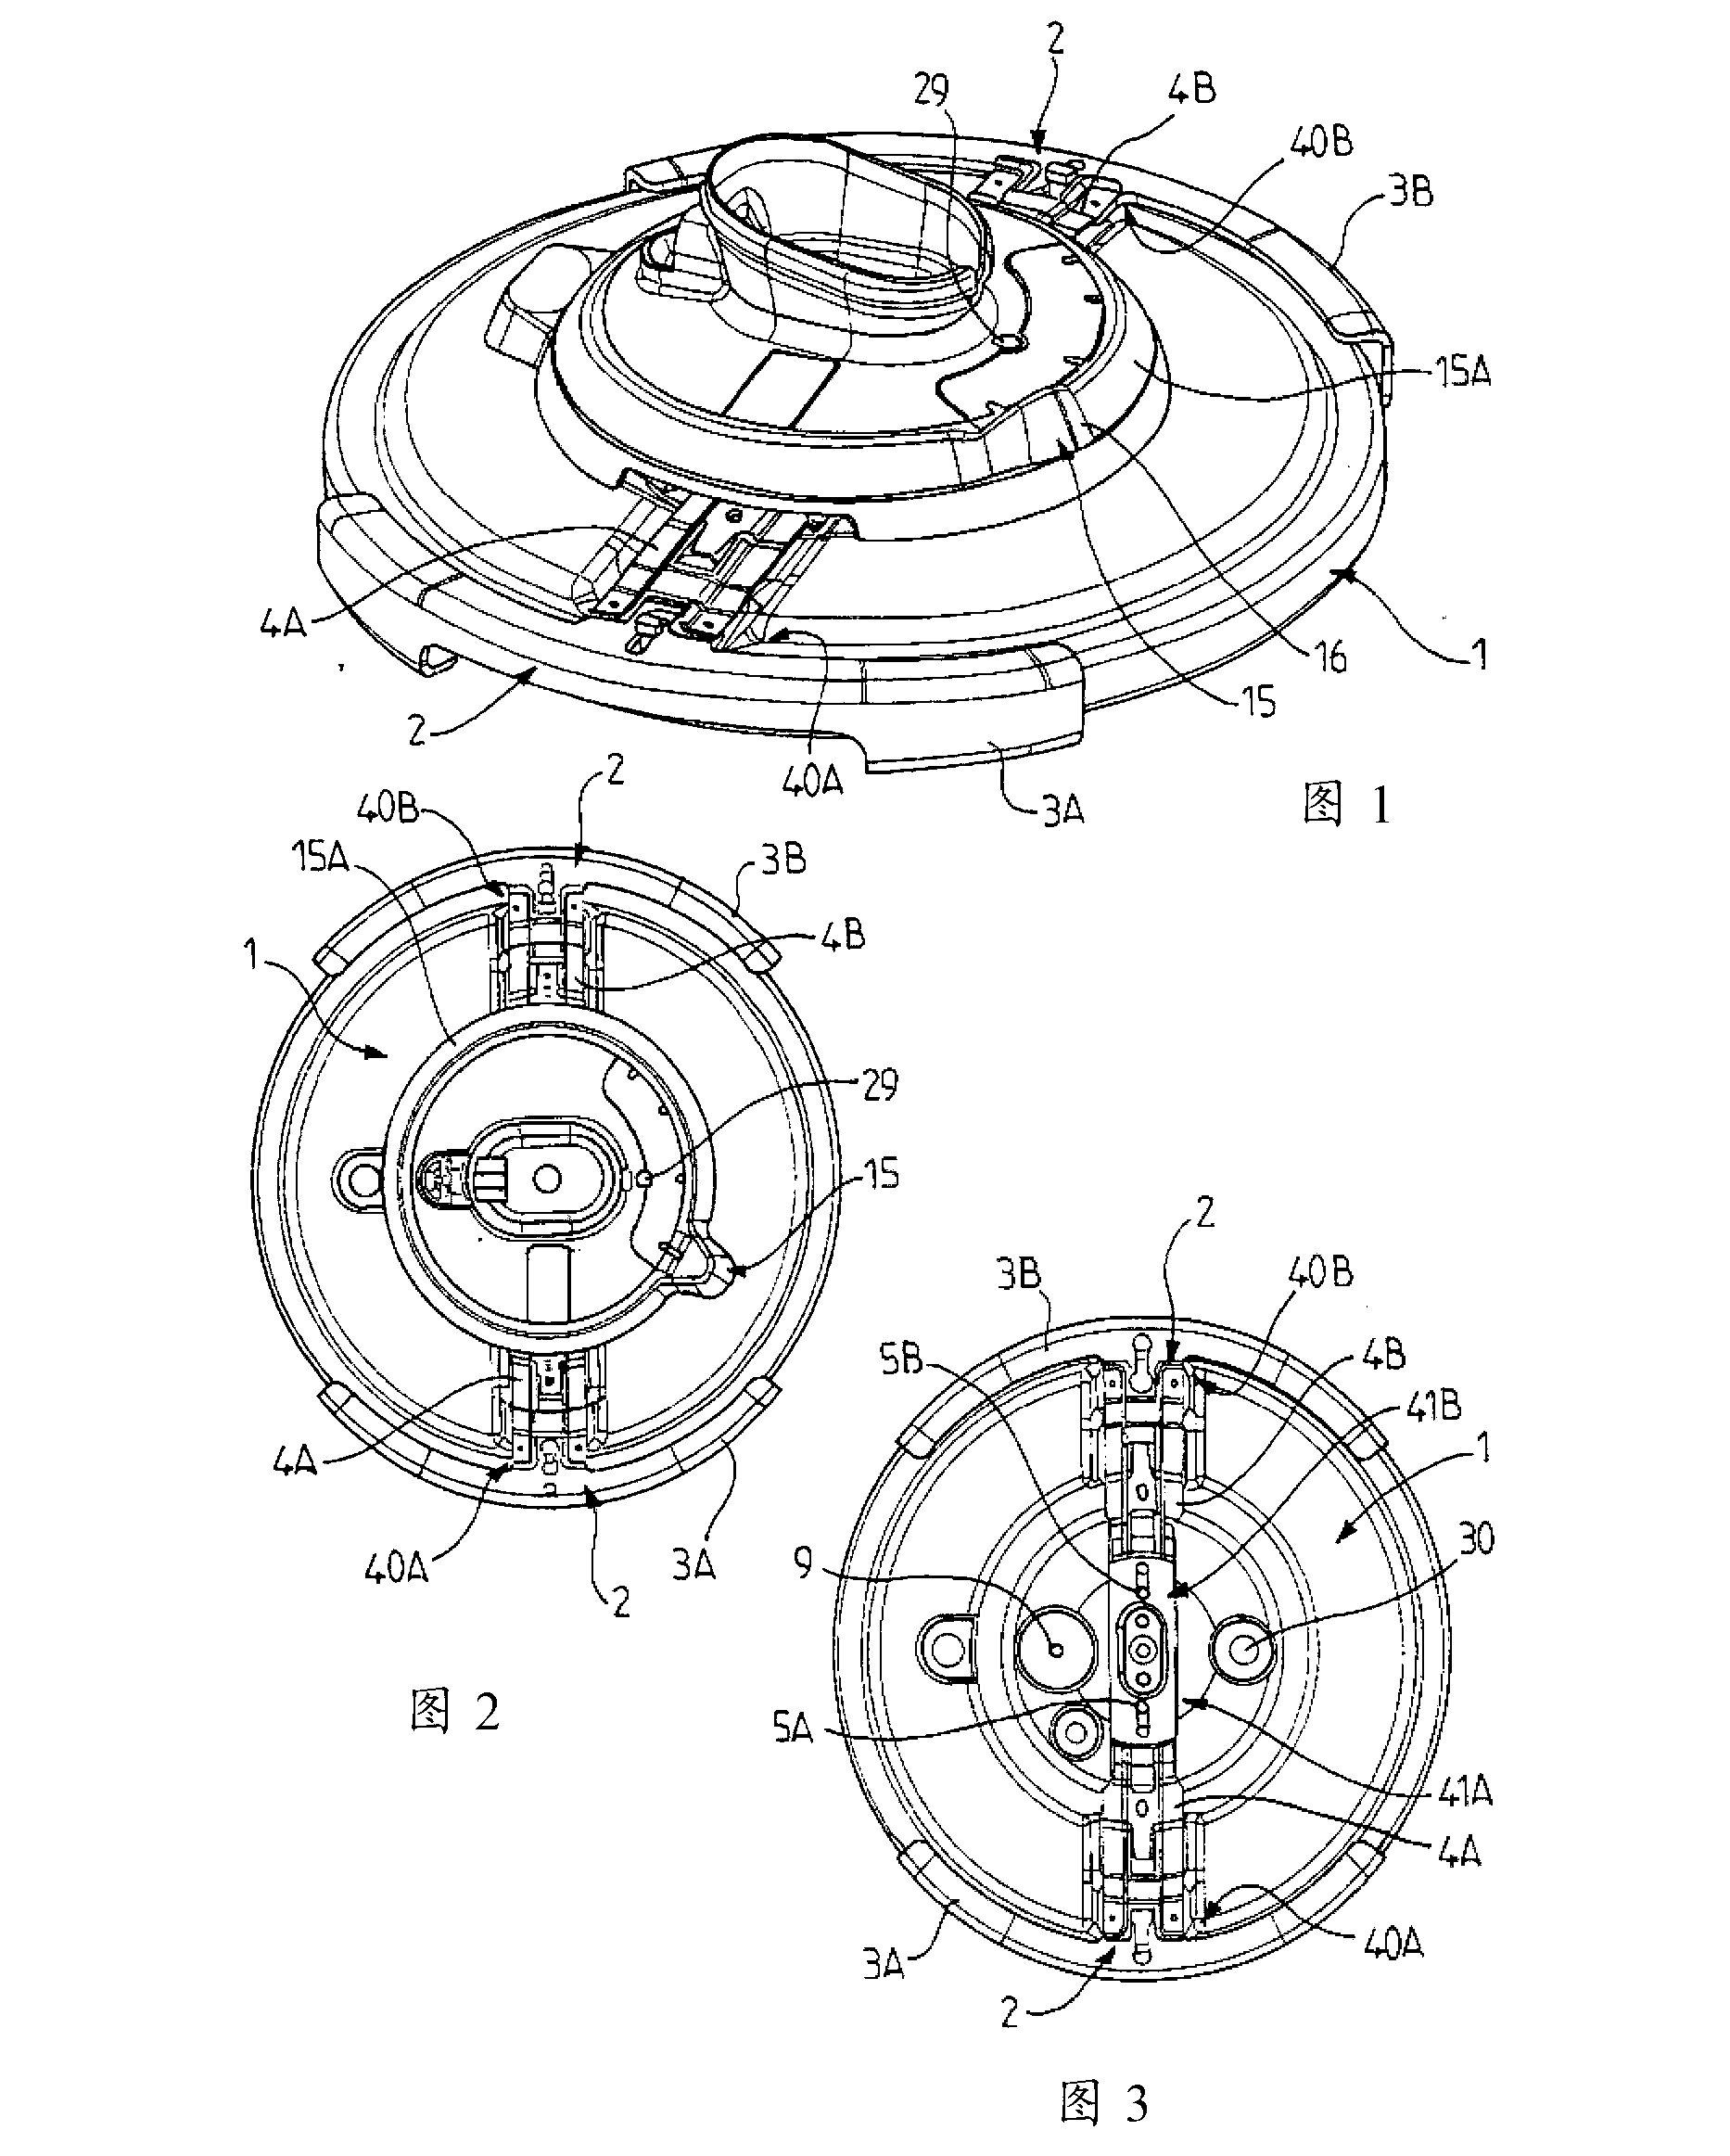 Appliance for cooking food under pressure, provided with a selector and a pressure-management member